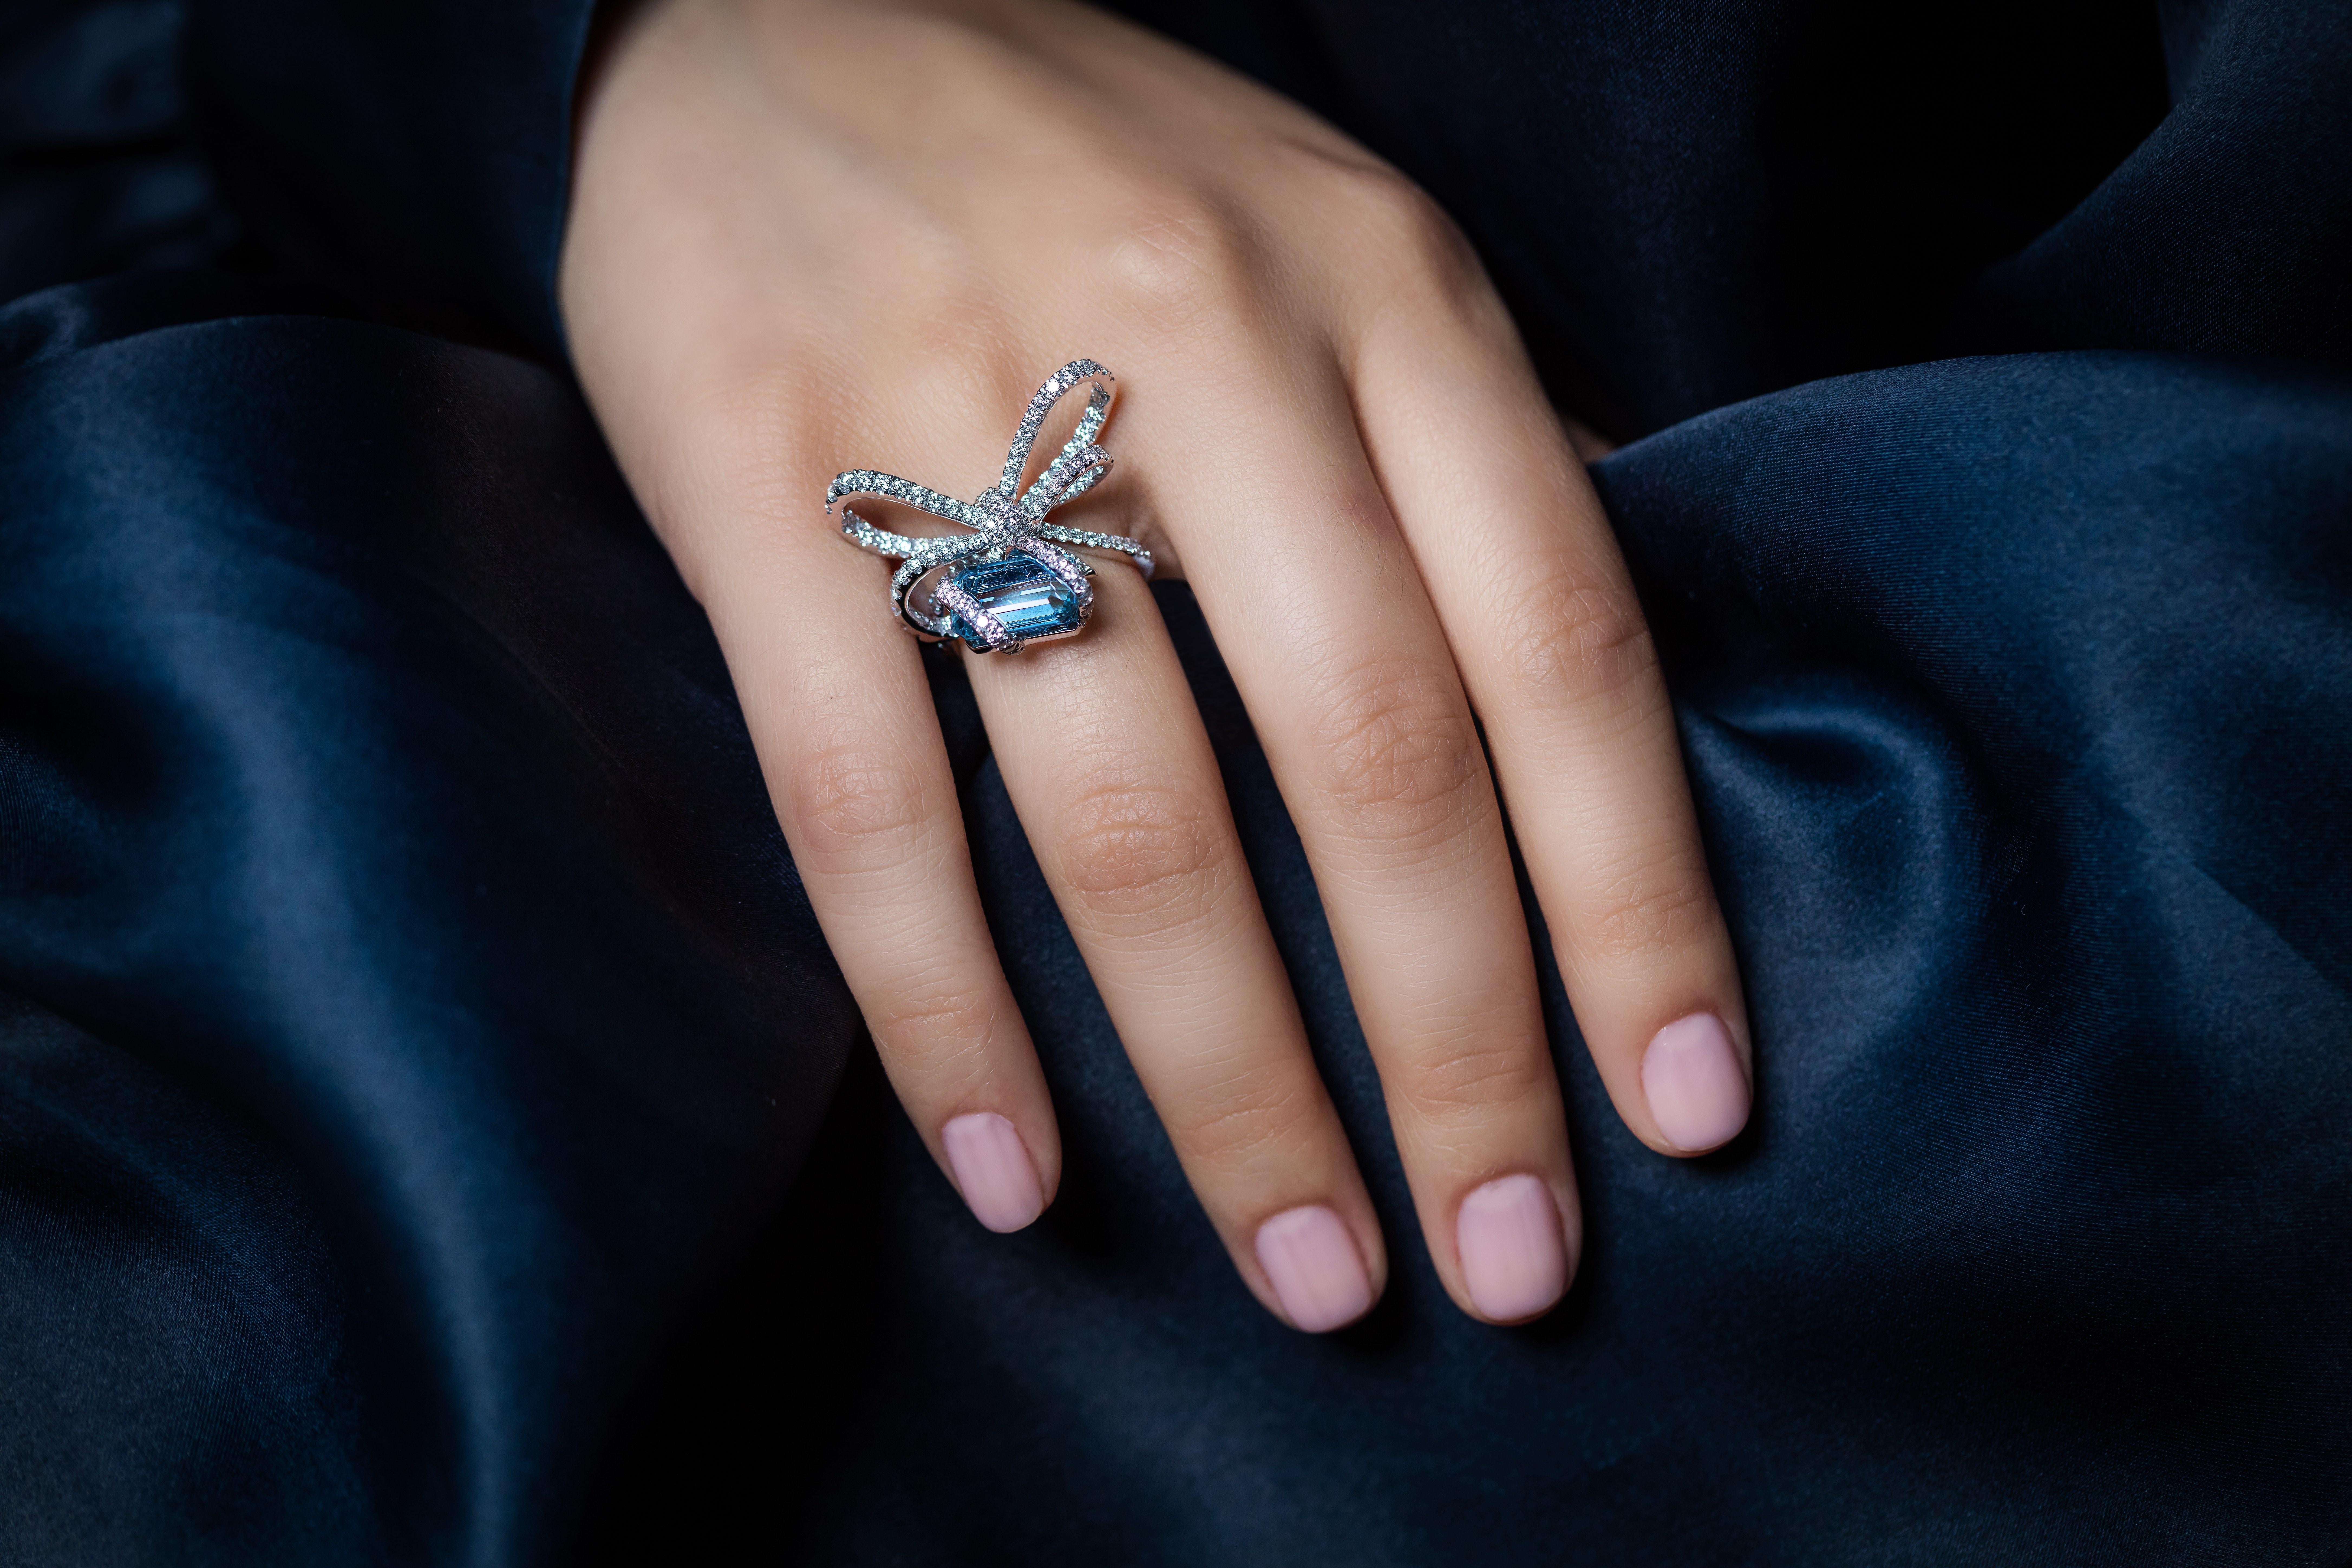 This beautiful piece is part of Lyla’s Bow, the first collection designed by Vania Leles. Embodying the spirit of VANLELES’ design, this collection is feminine and timeless, which are a must have for jewellery lovers, and the perfect gift for